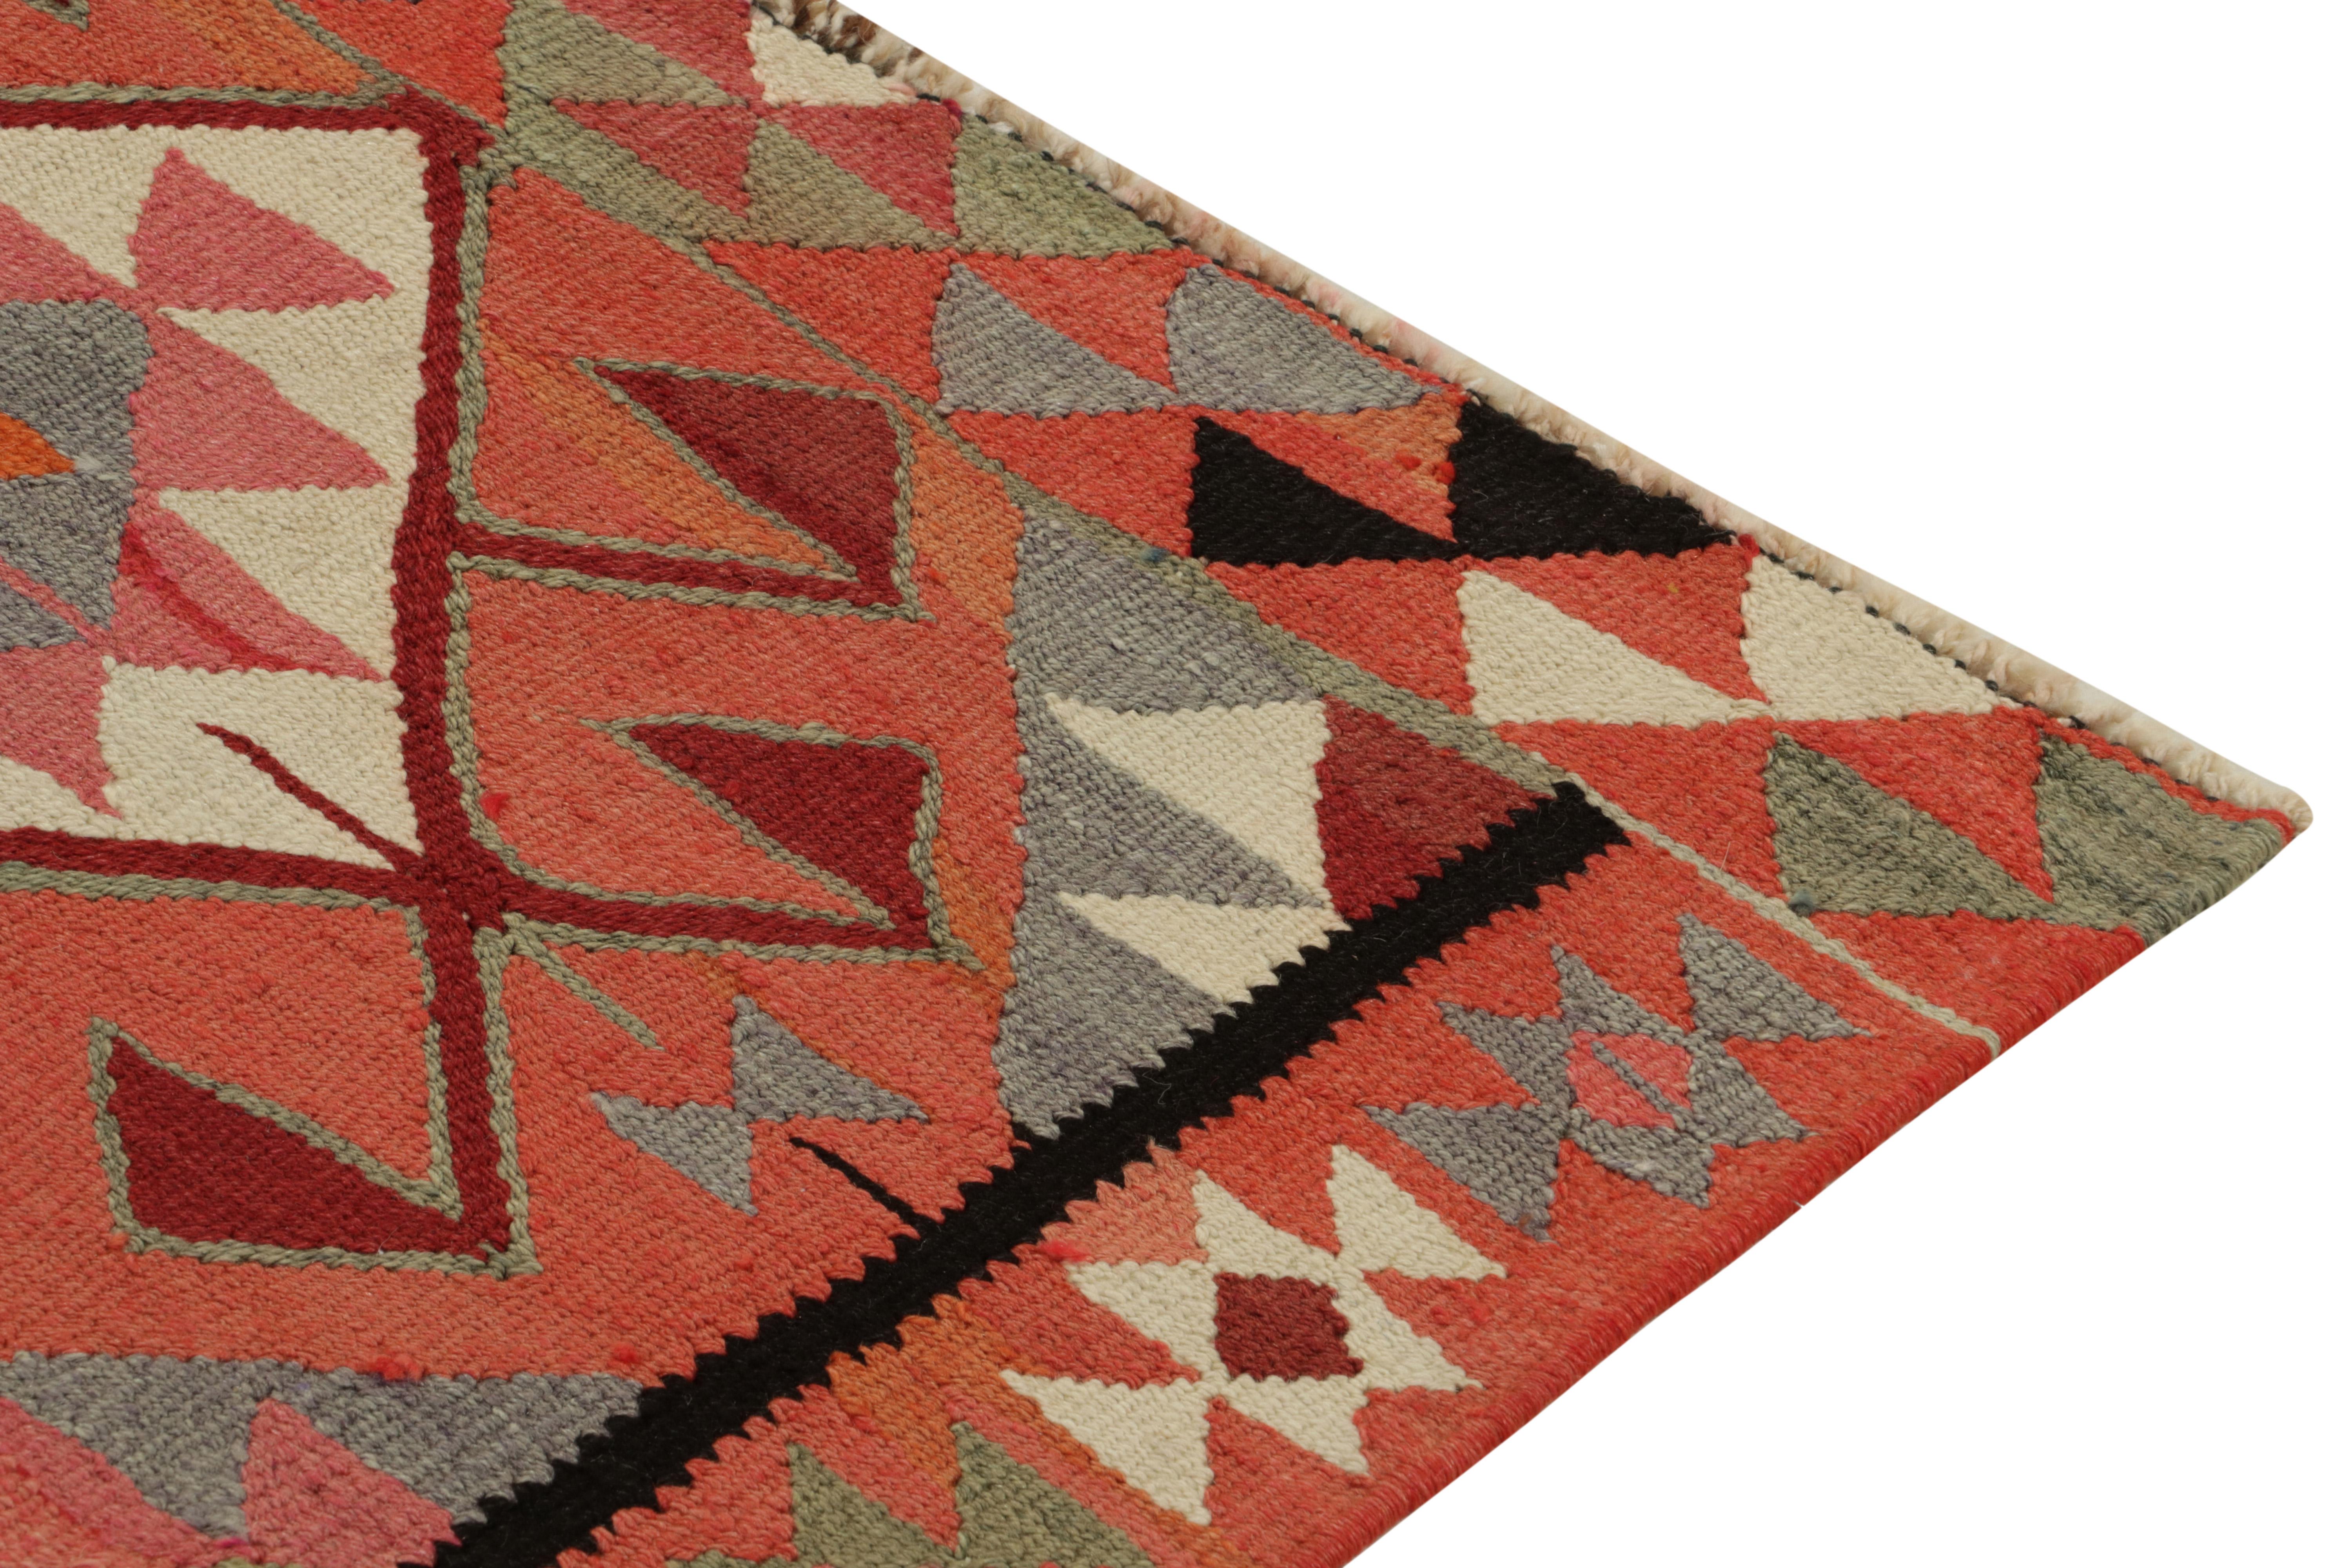 Vintage Kilim Tribal Runner in Multicolor Geometric Patterns by Rug & Kilim In Good Condition For Sale In Long Island City, NY